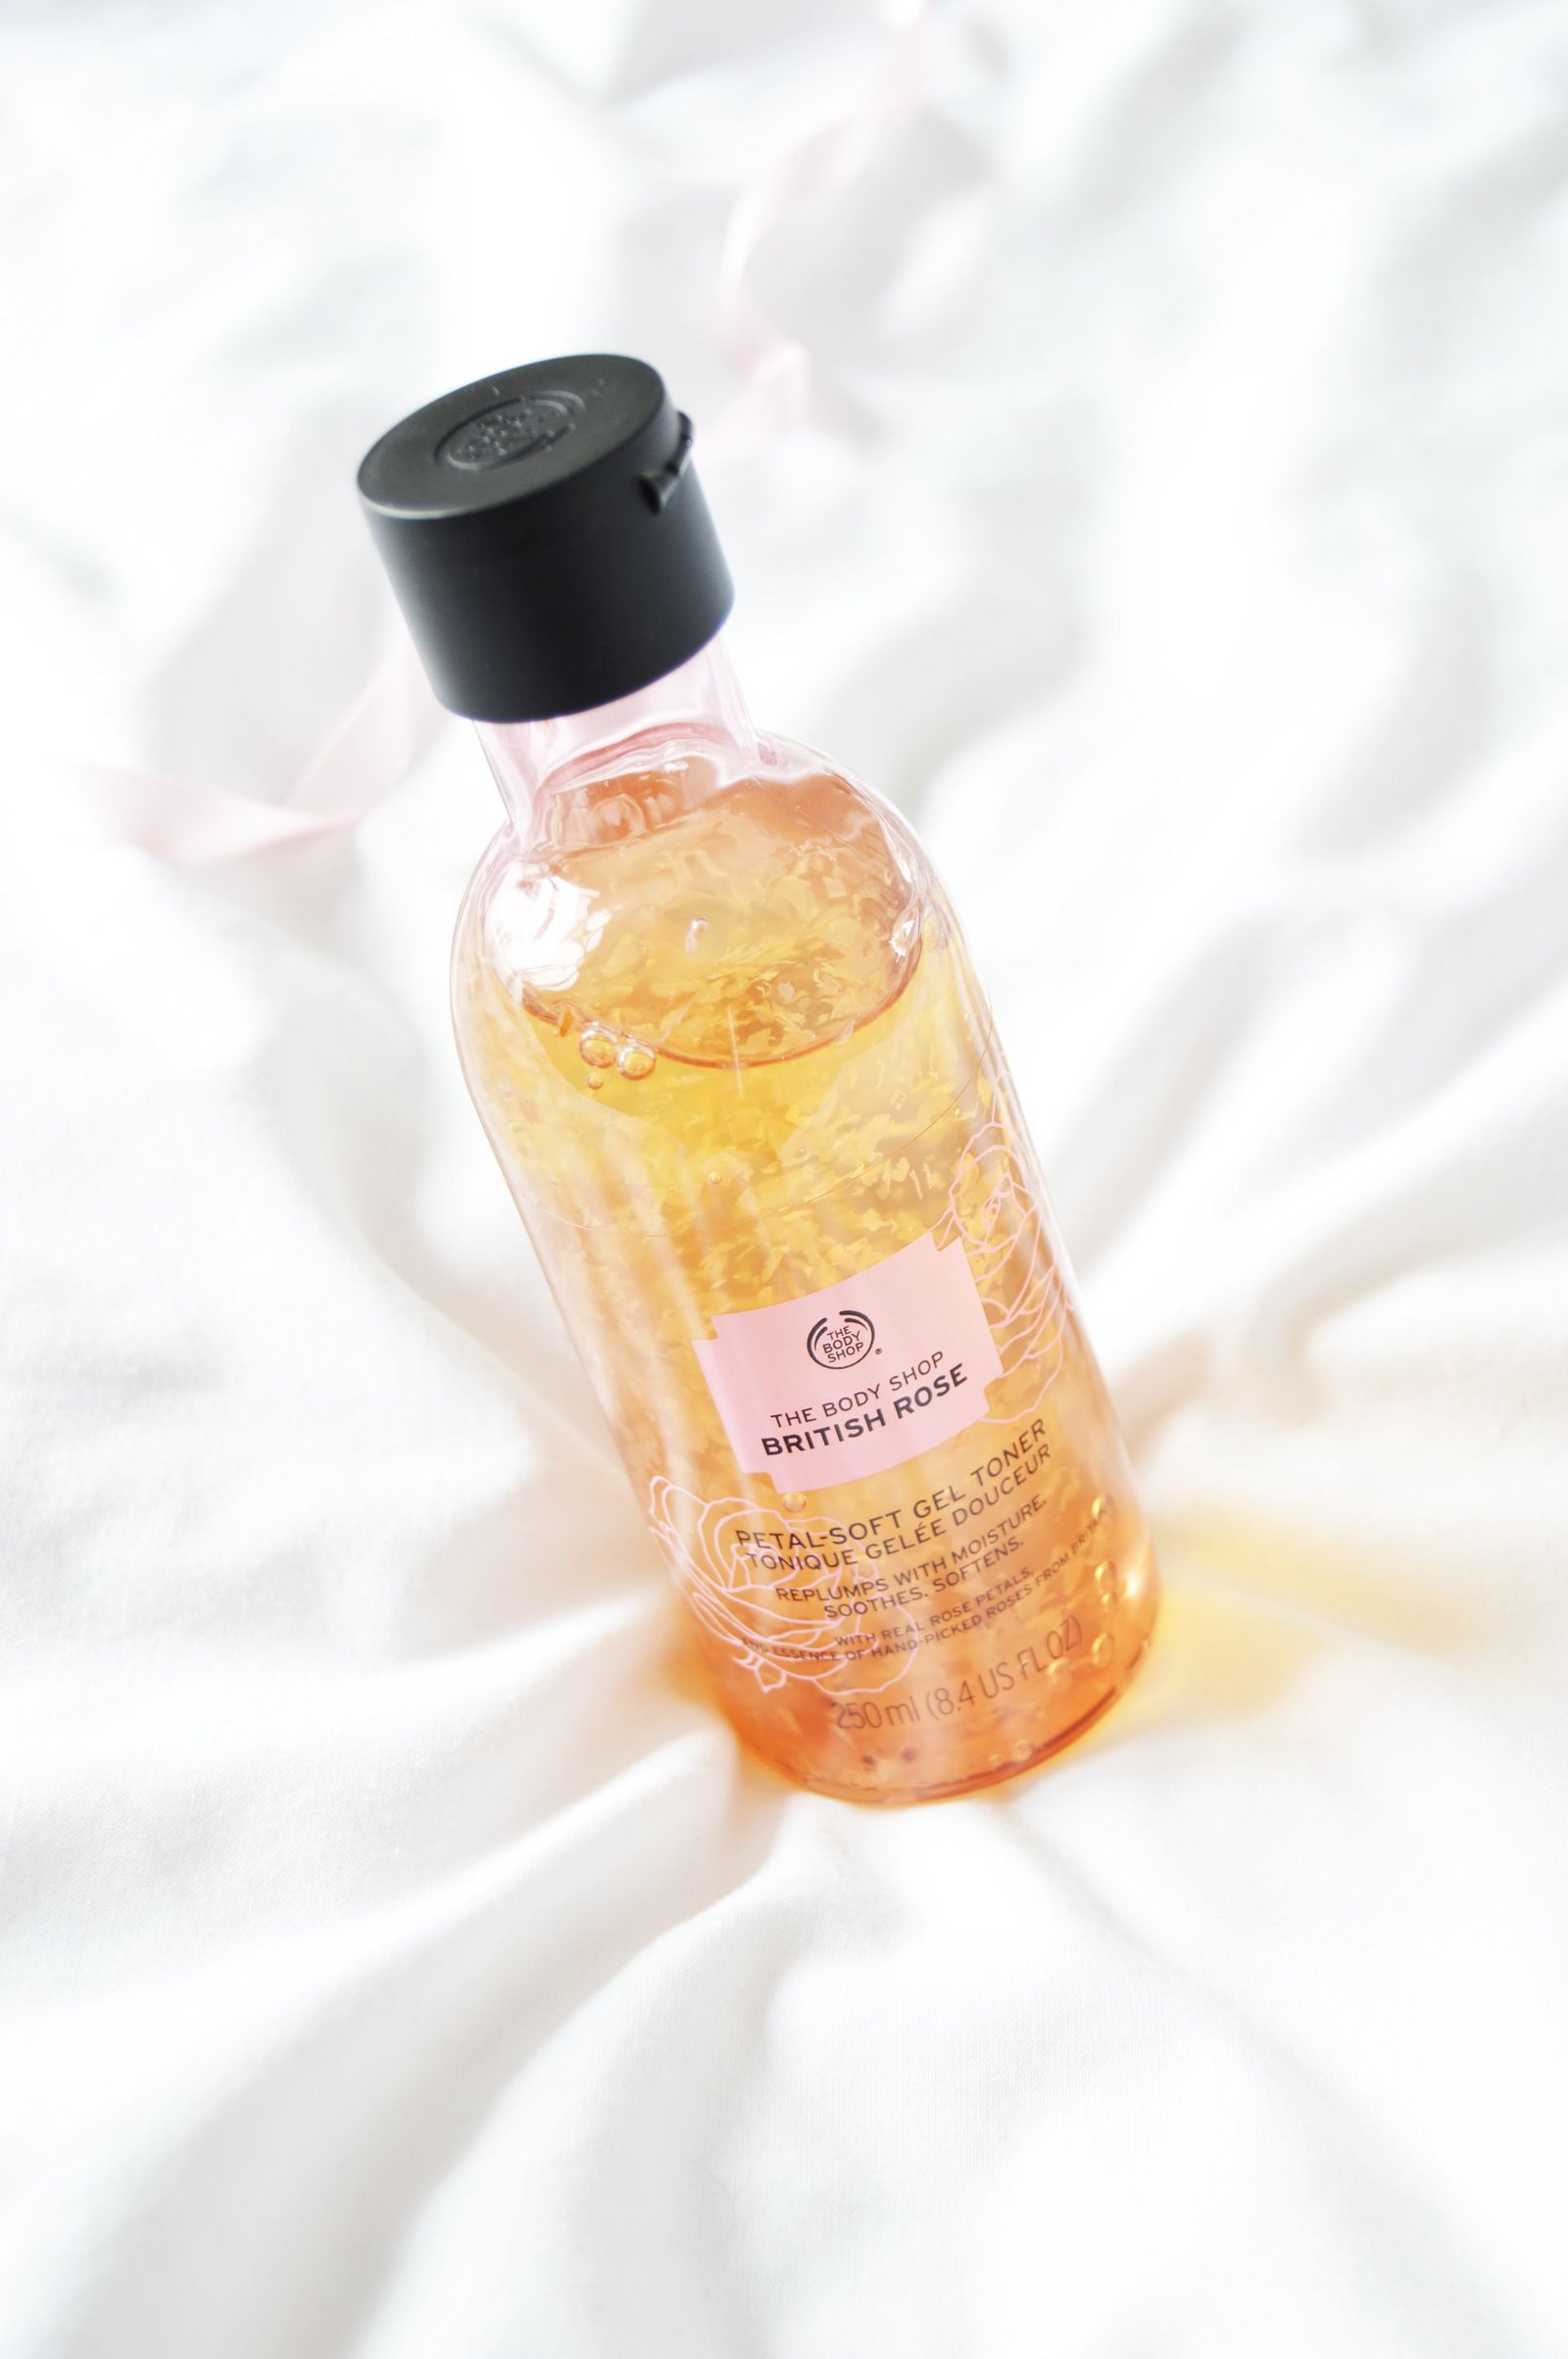 The Body Shop British Rose Petal Soft Gel Toner is gentle and makes the skin softer and smoother.